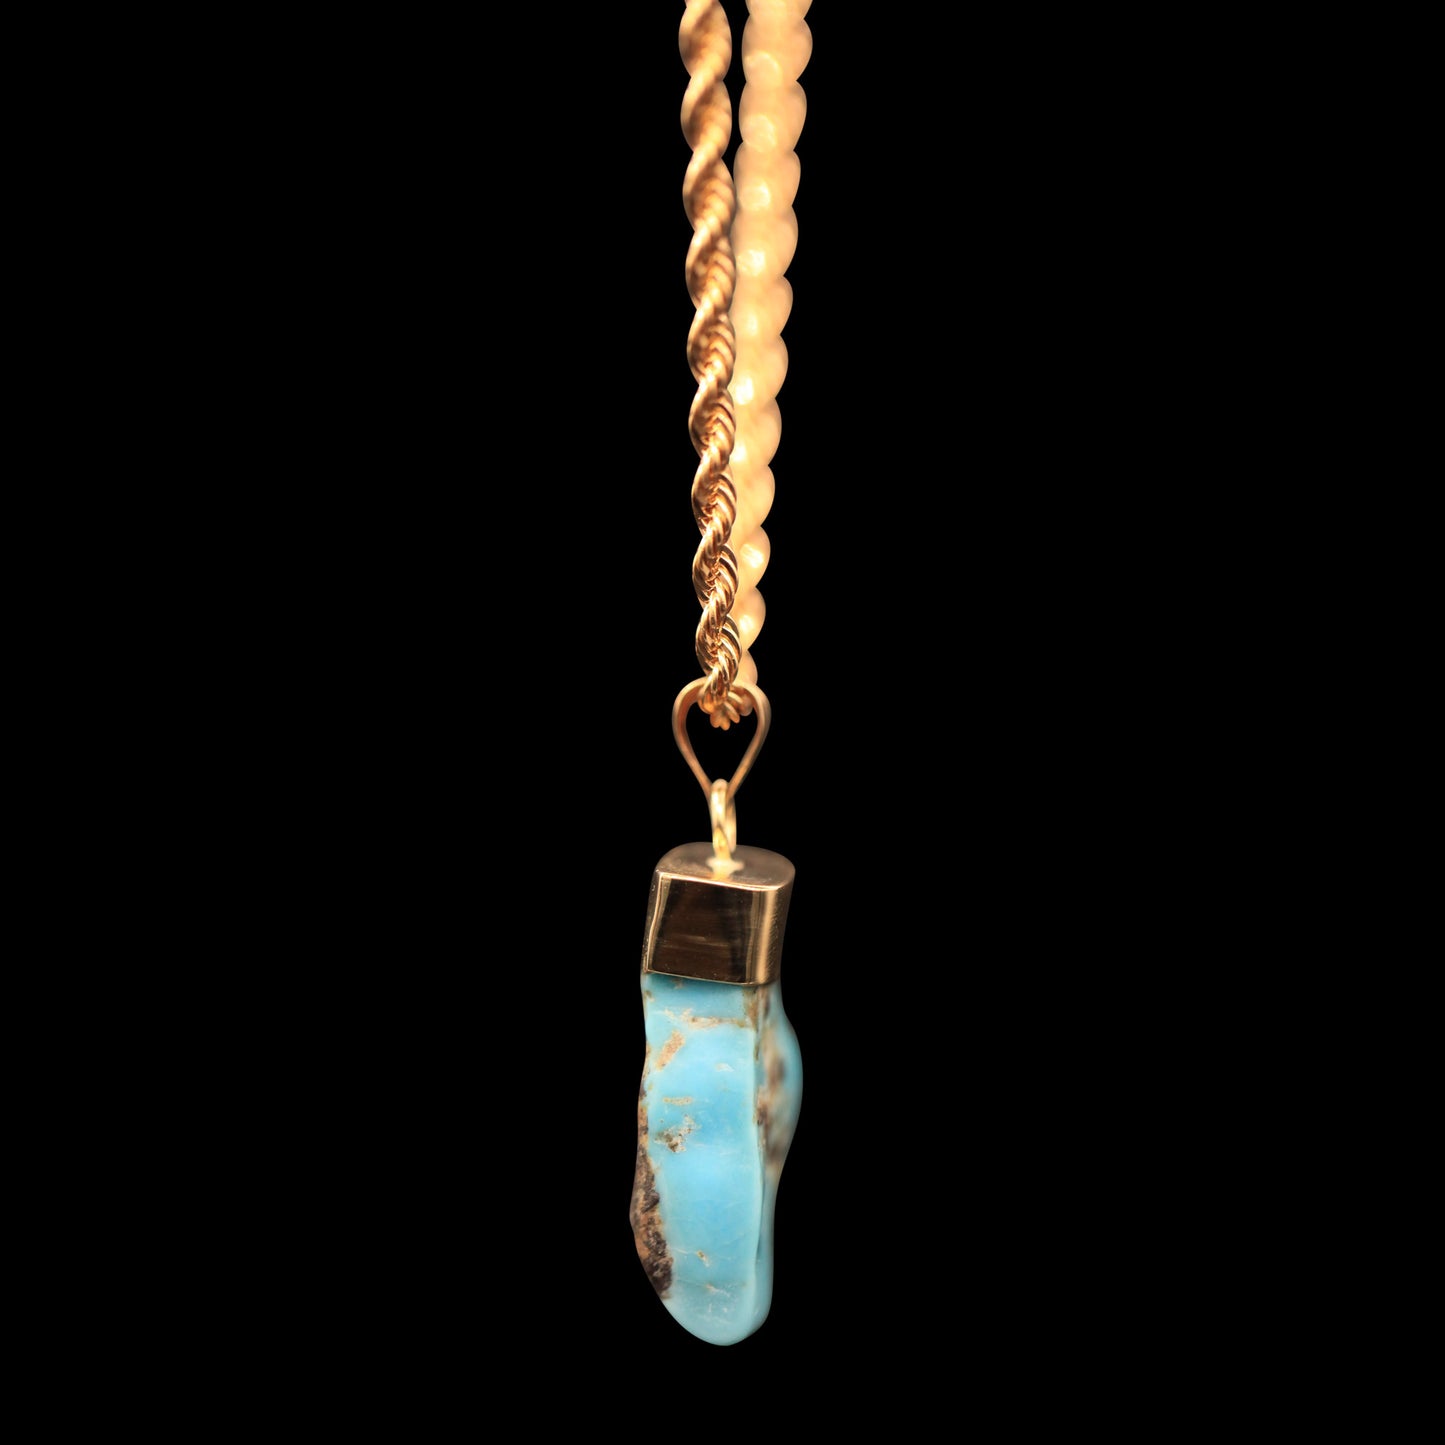 18.3 CARAT NATURAL UNTREATED MEXICAN TURQUOISE GEM ON ROPE